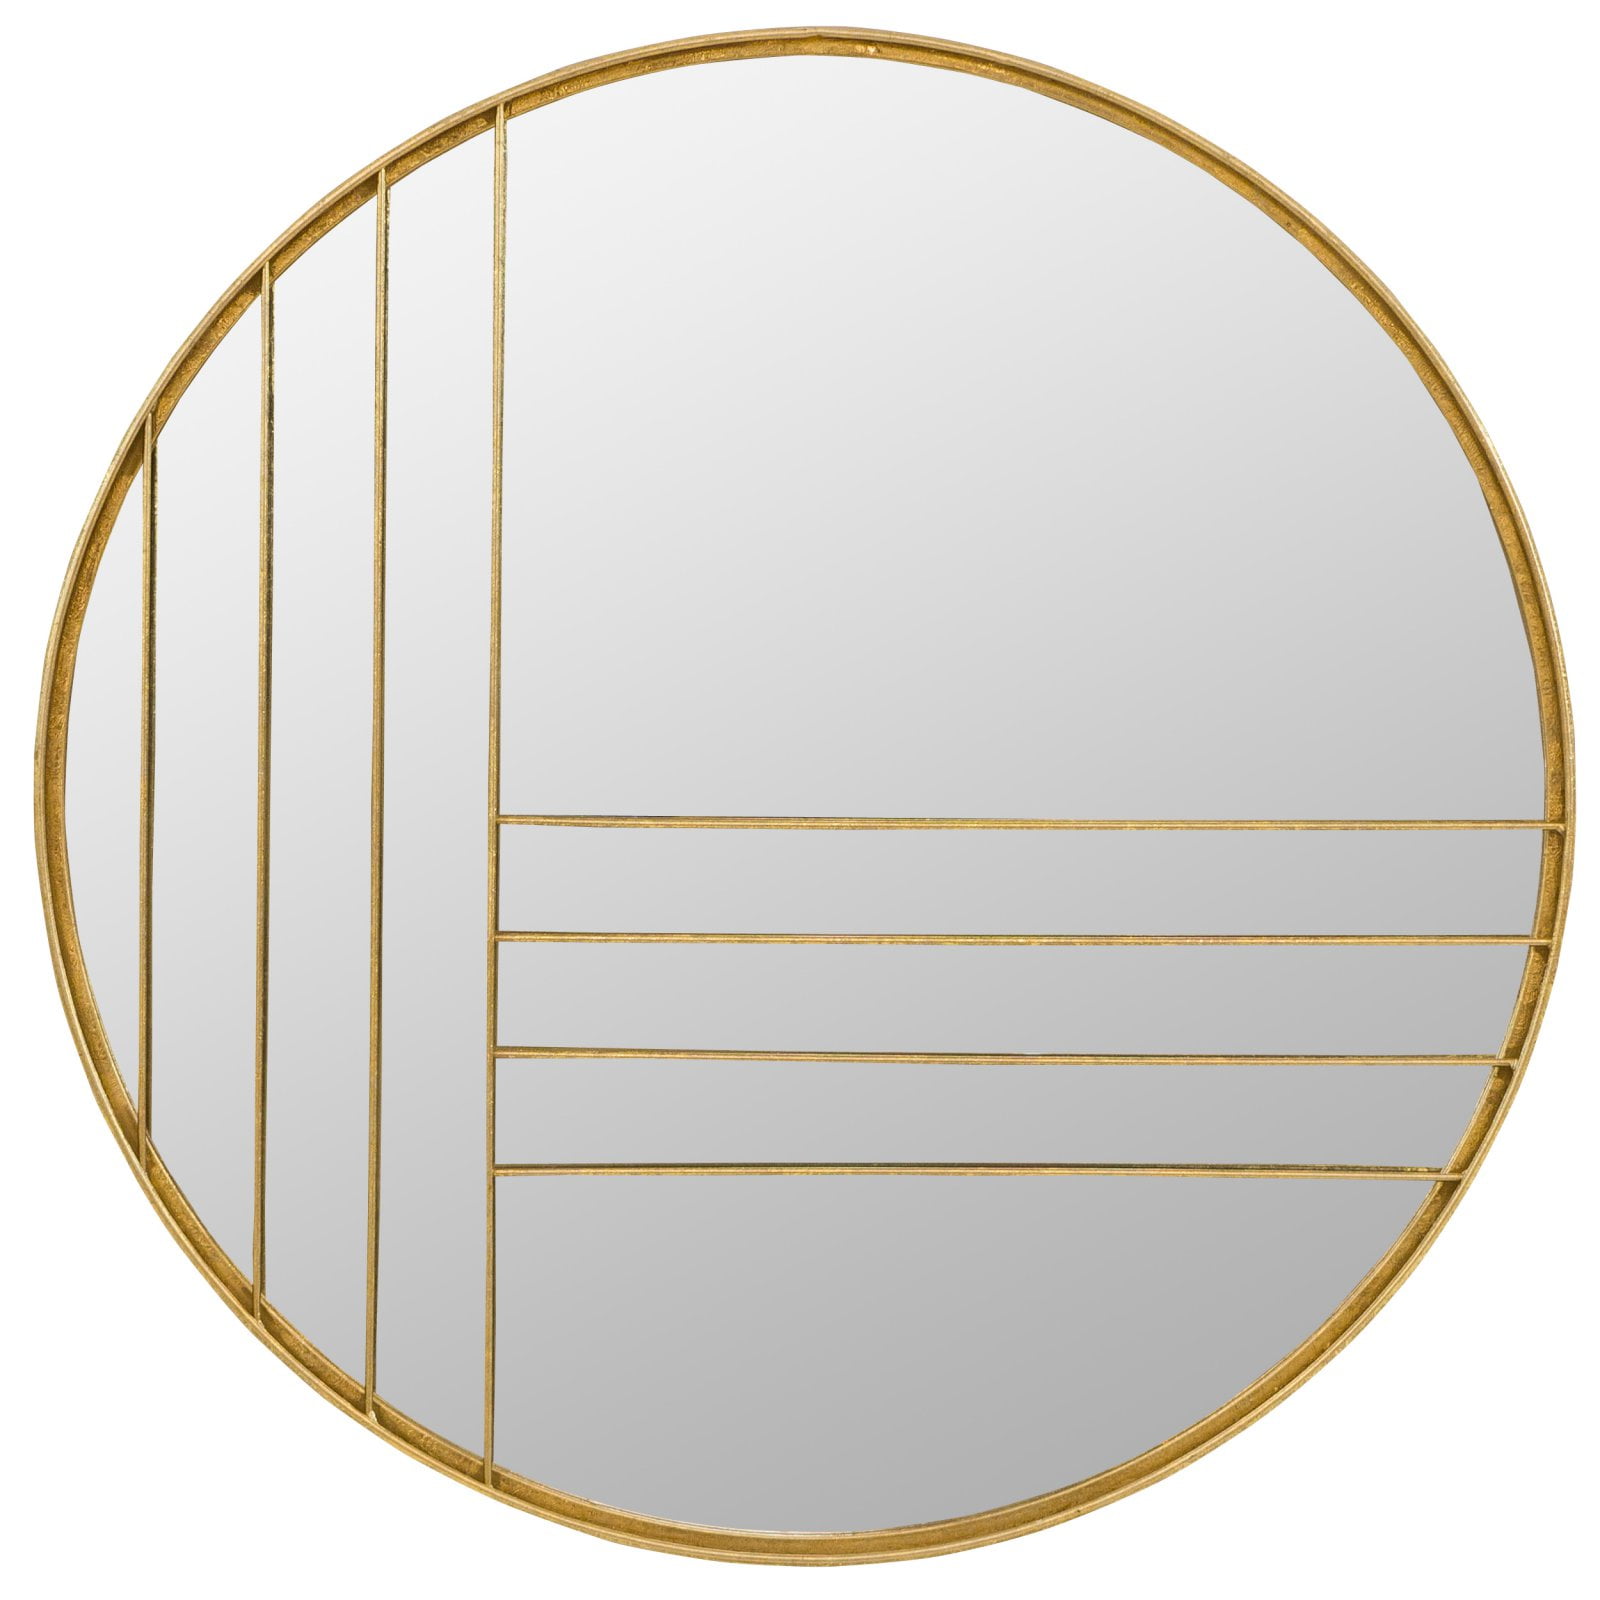 Picture of Aspire Home Accents 7128 Damis Modern Wall Mirror, Gold